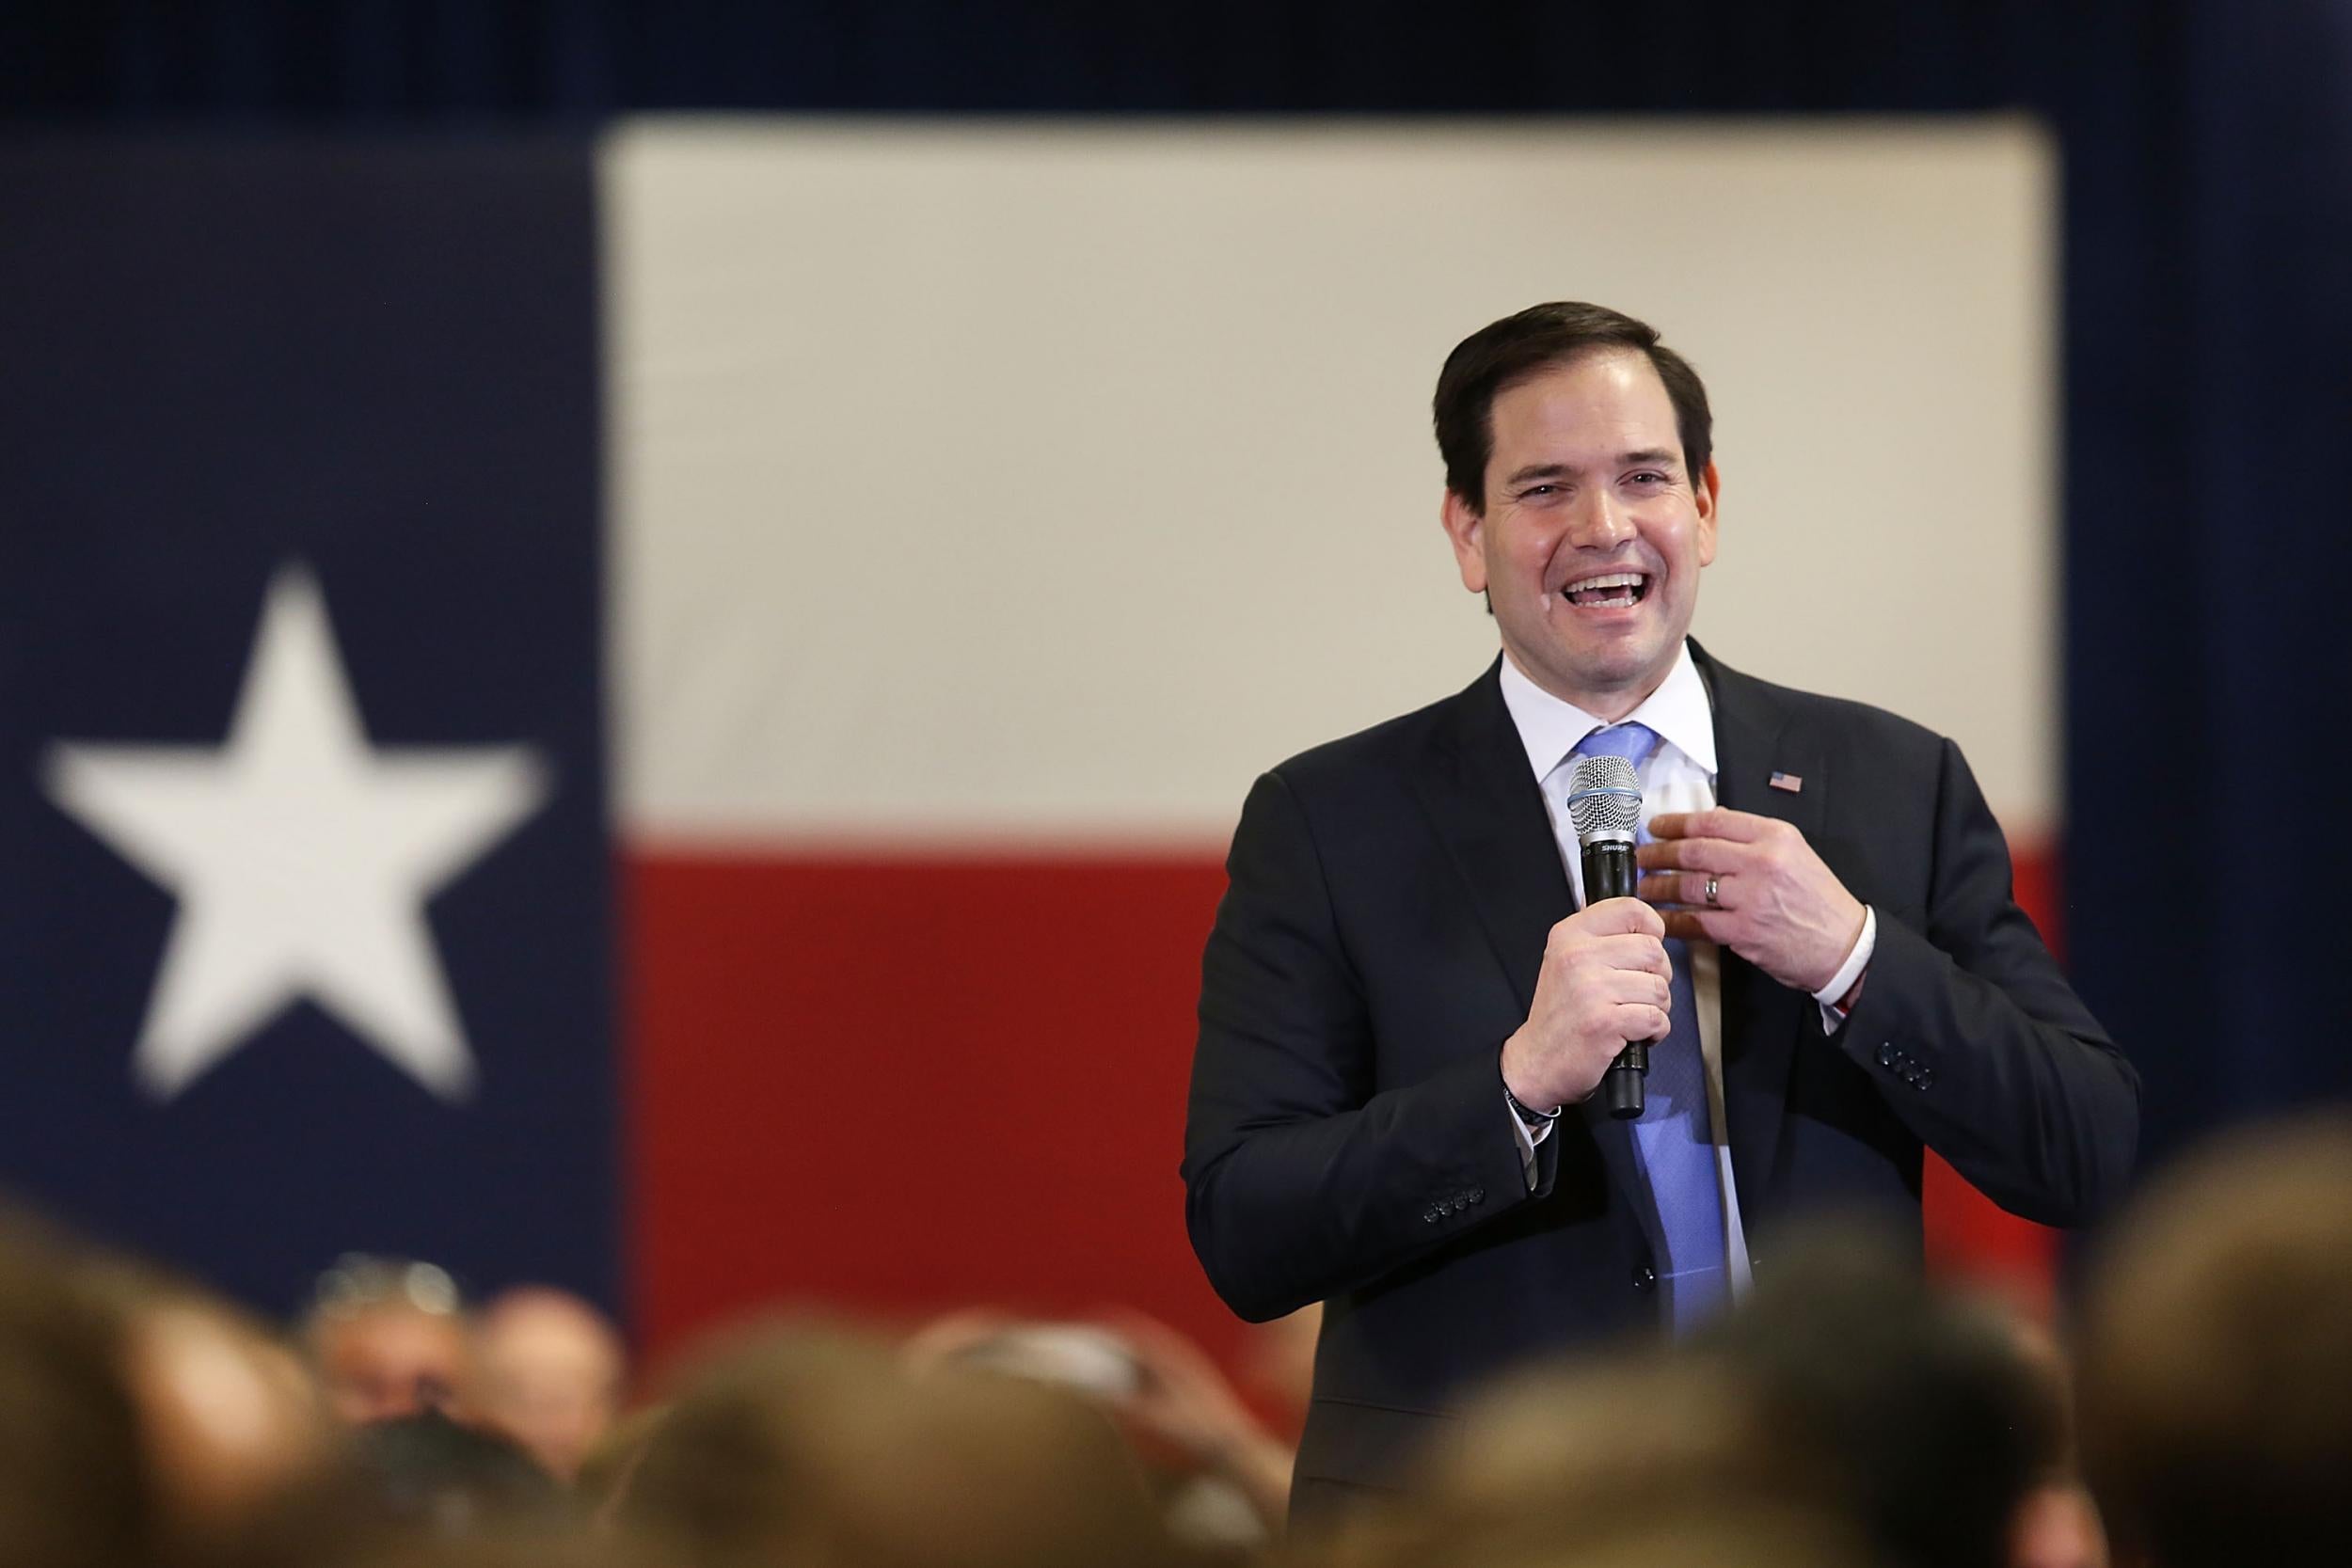 Rubio in Texas - a state that could suit him if Cruz, a Texan senator, wasn't still in the race.